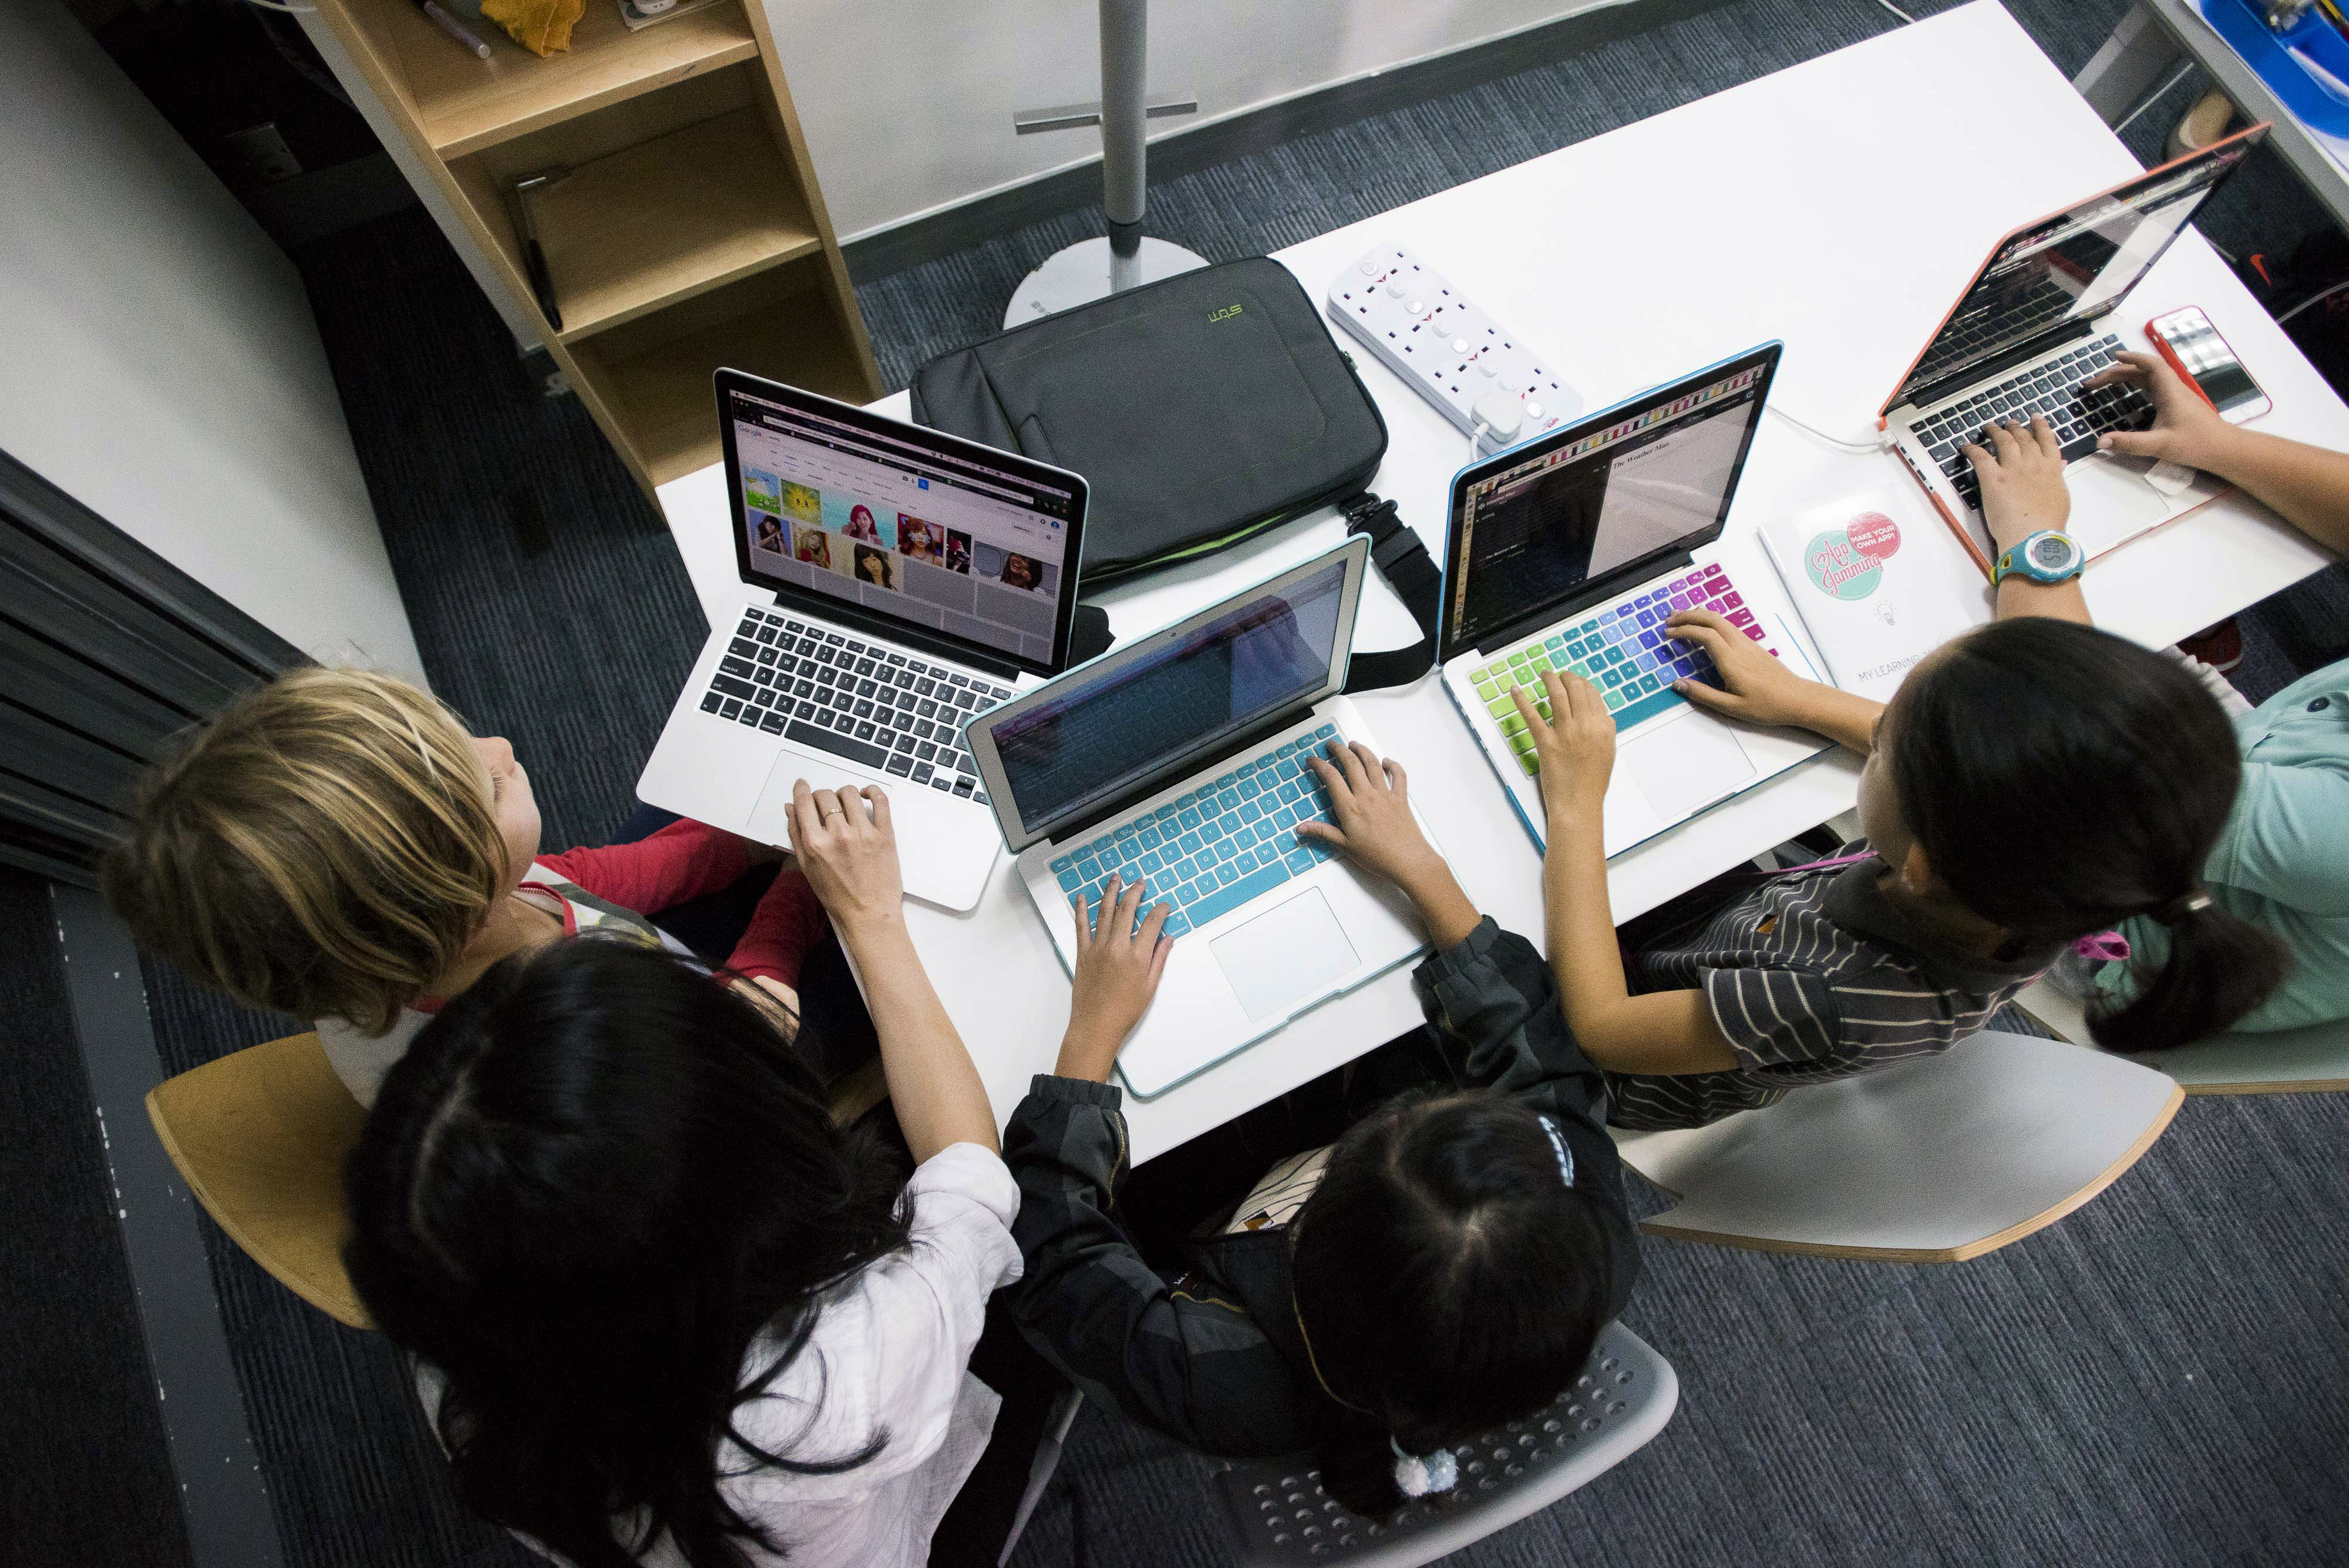 Students type on Apple Inc. laptop computers during a coding class at the First Code Academy in Hong Kong, China, on Friday, Nov. 13, 2015. (Bloomberg—Bloomberg via Getty Images)